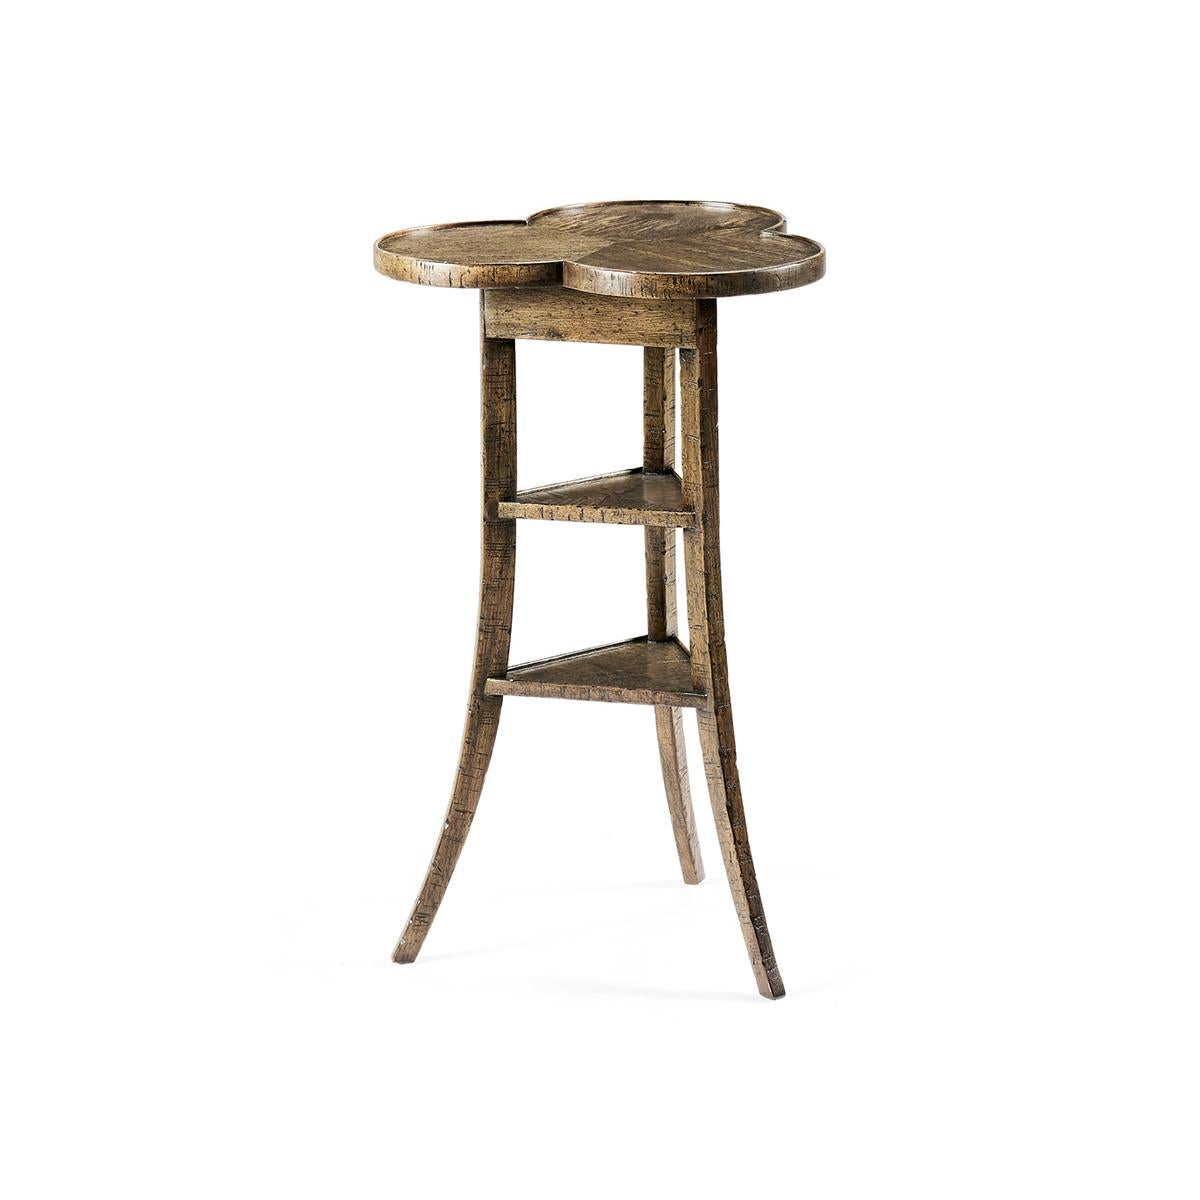 Trefoil Three-Tier side table, a heavily distressed side table with a trefoil top mounted on three splayed legs around two triangular shelves in a medium drift finish.

Dimensions: 16